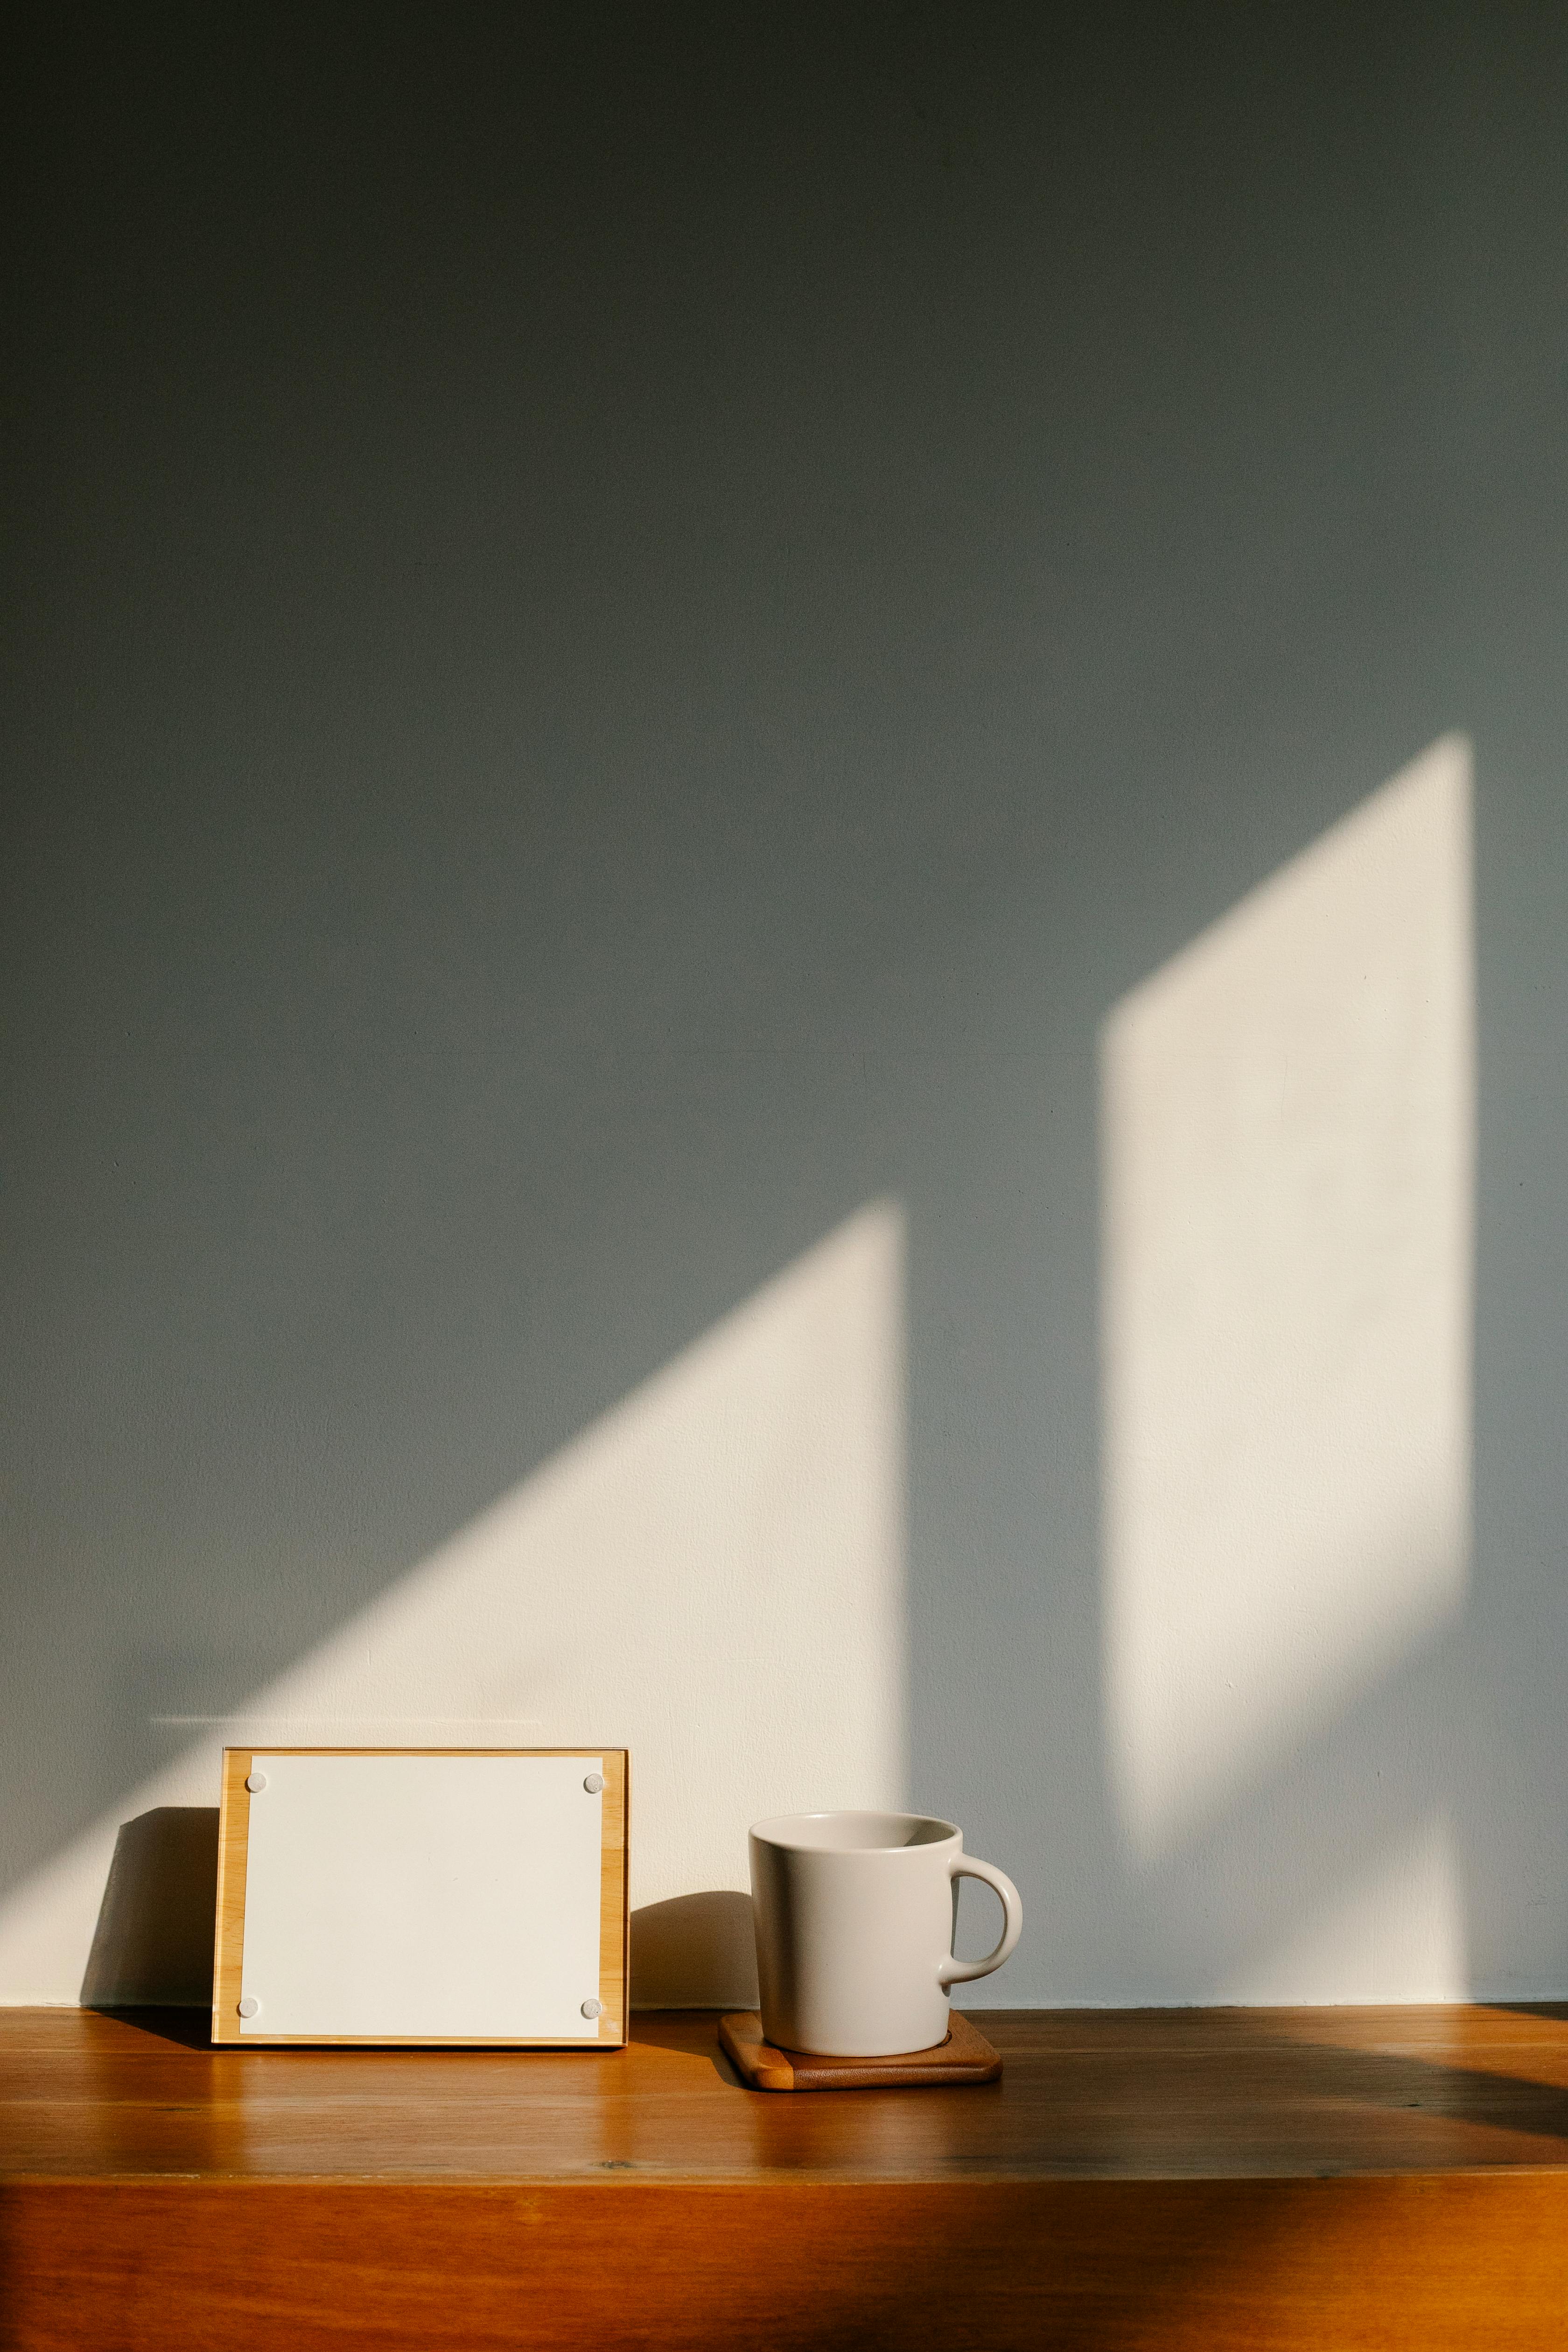 blank picture frame and cup on wooden table